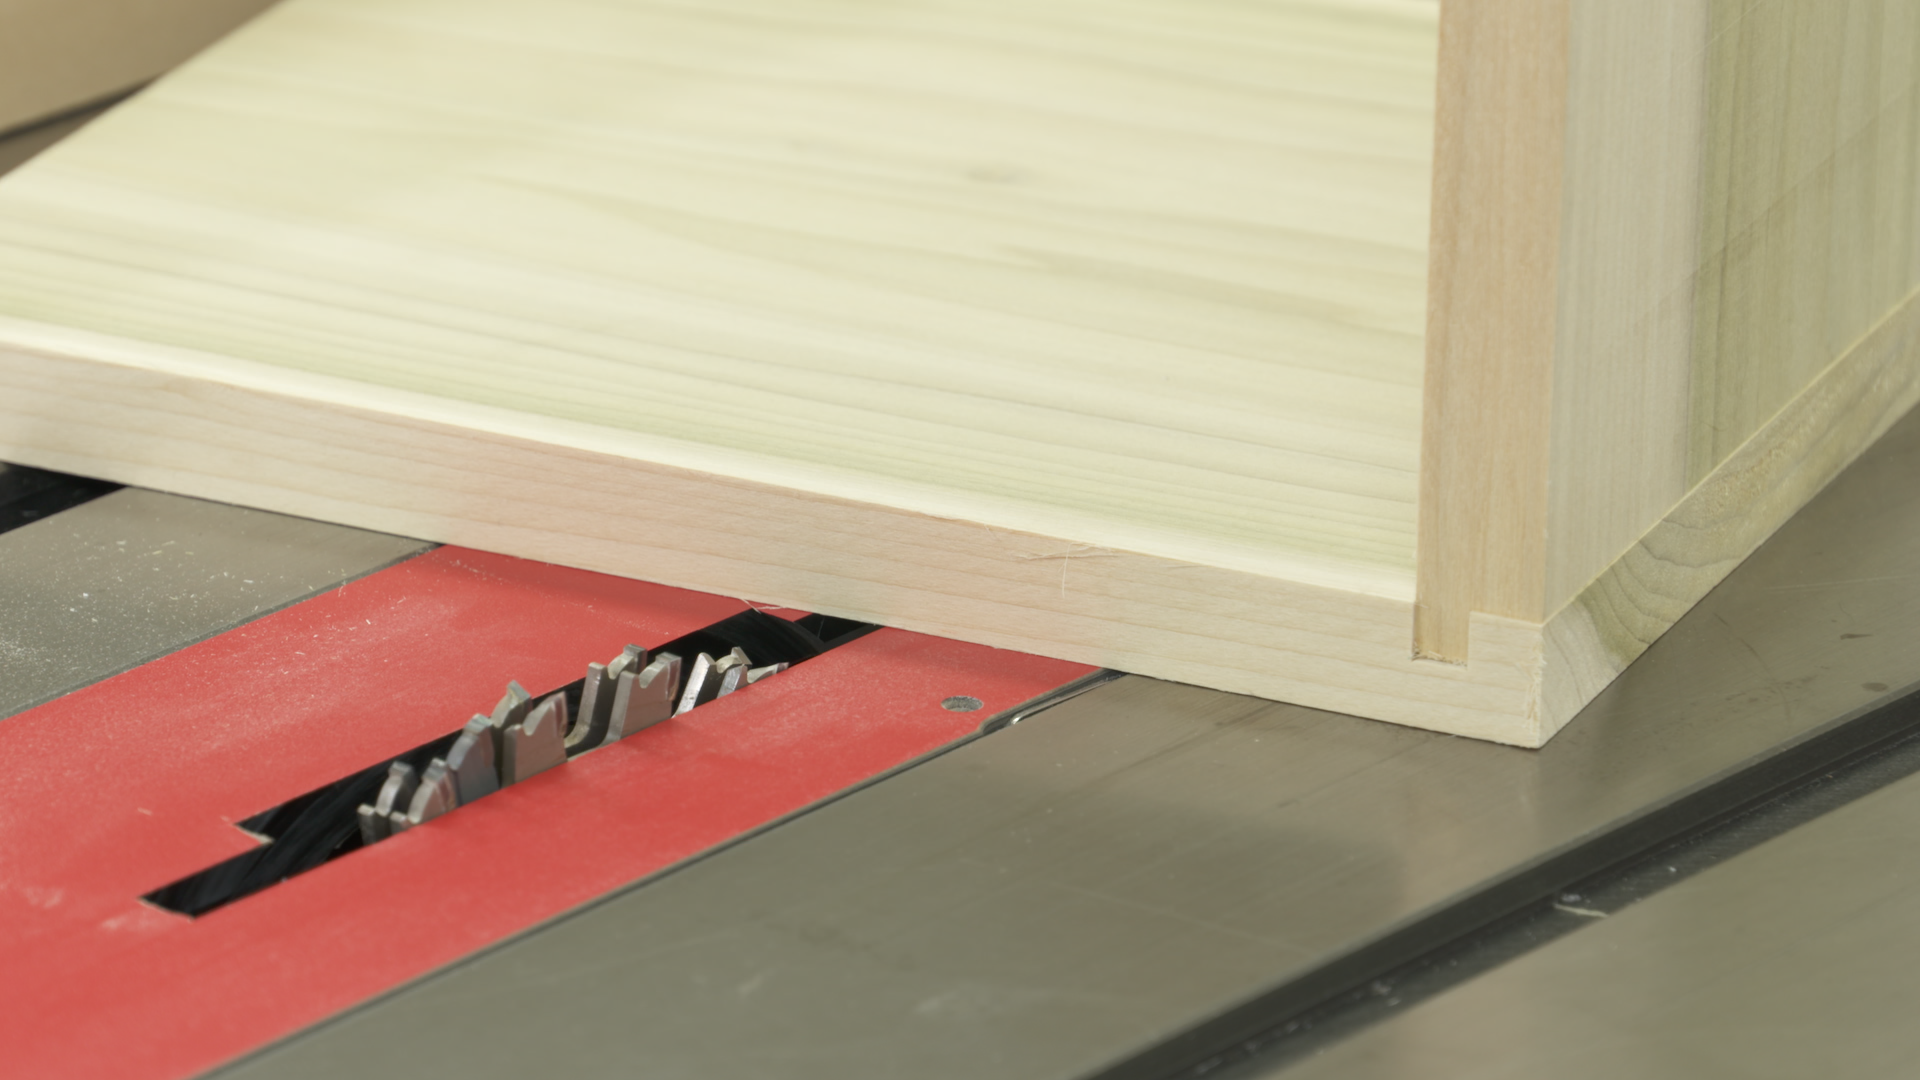 Table Saw Dado Cuts Create Lock Joints product featured image thumbnail.